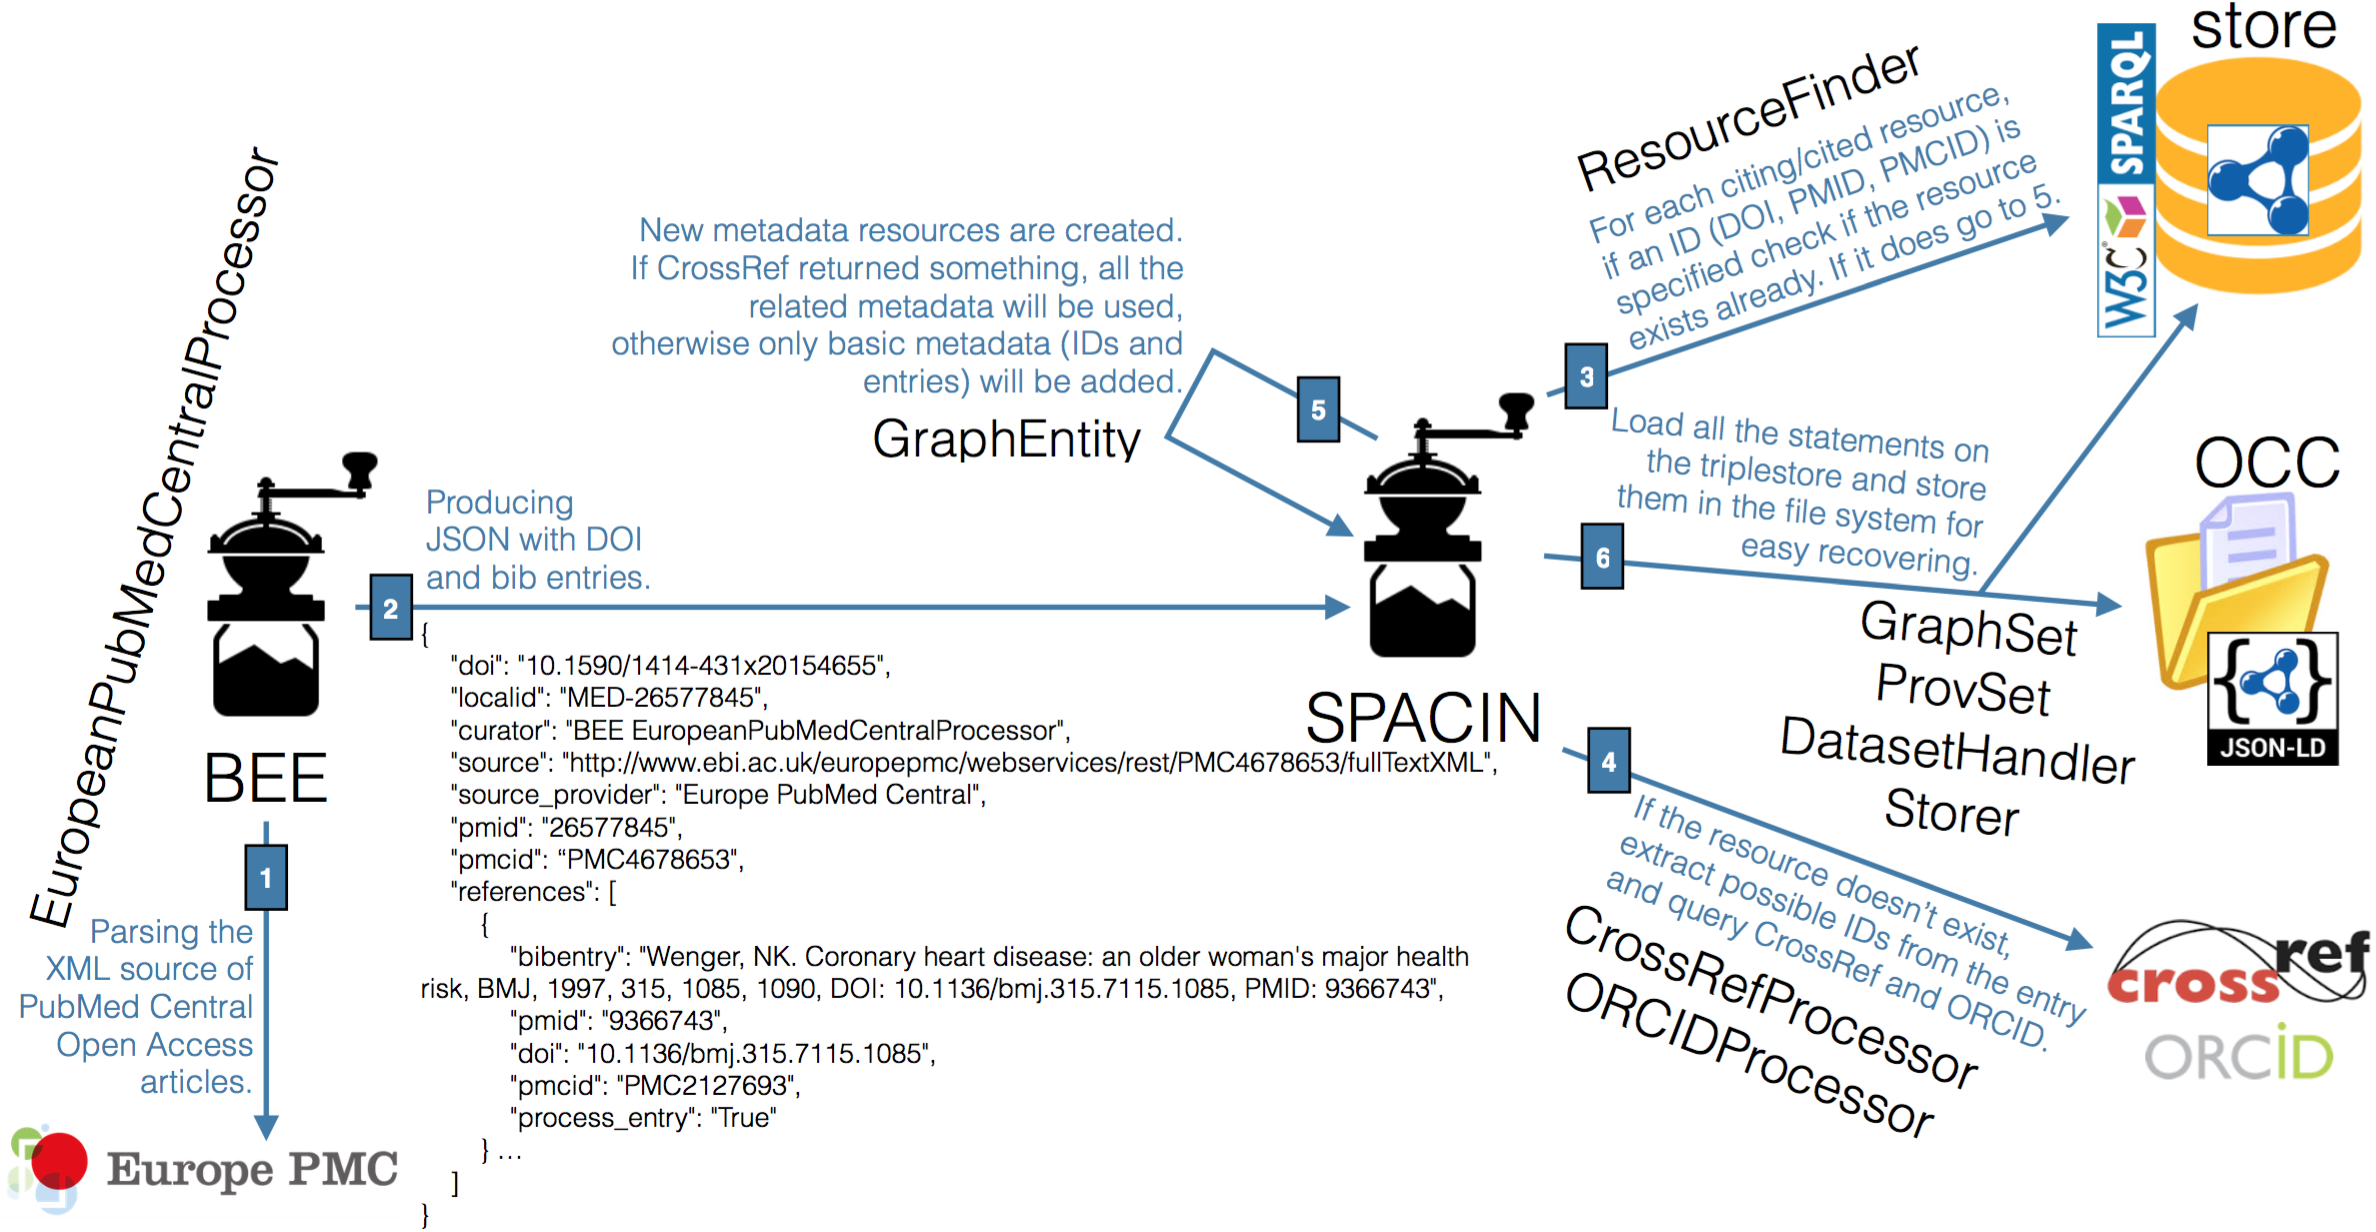 The ingestion workflow implemented by the OpenCitations Corpus.